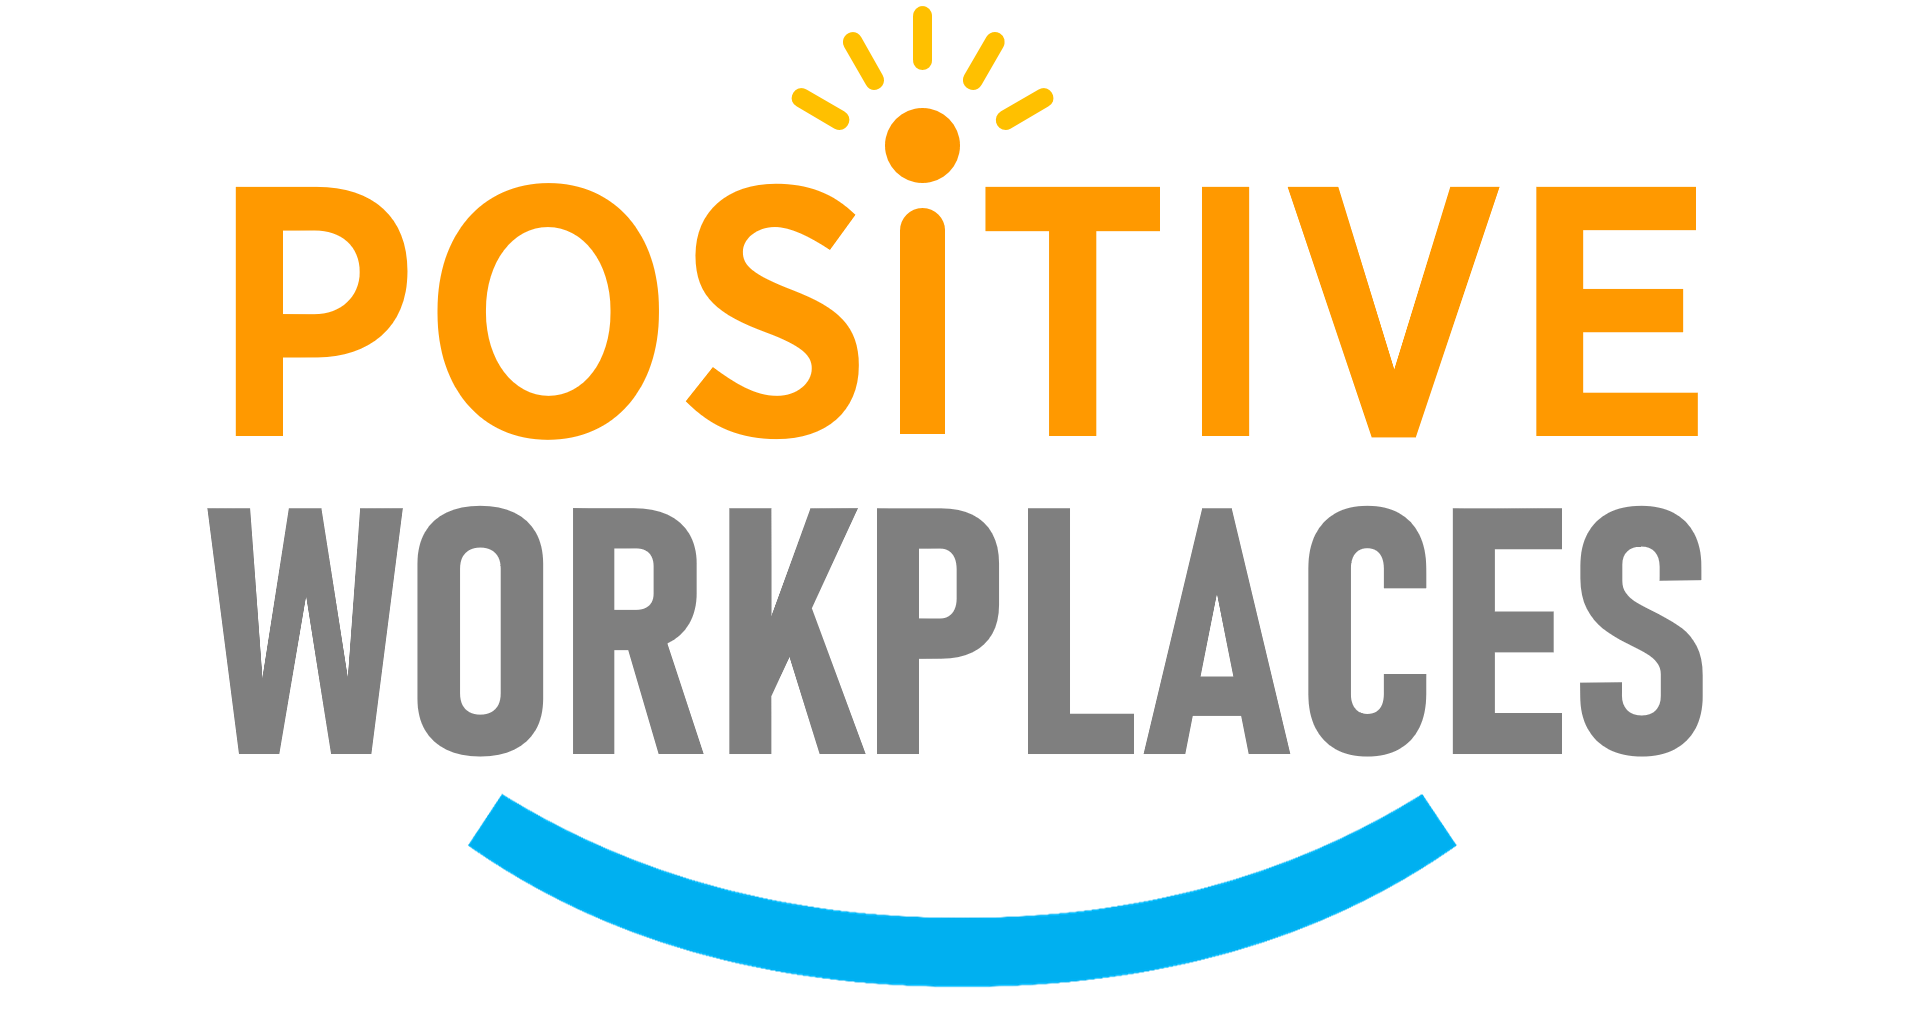 Positive Workplaces